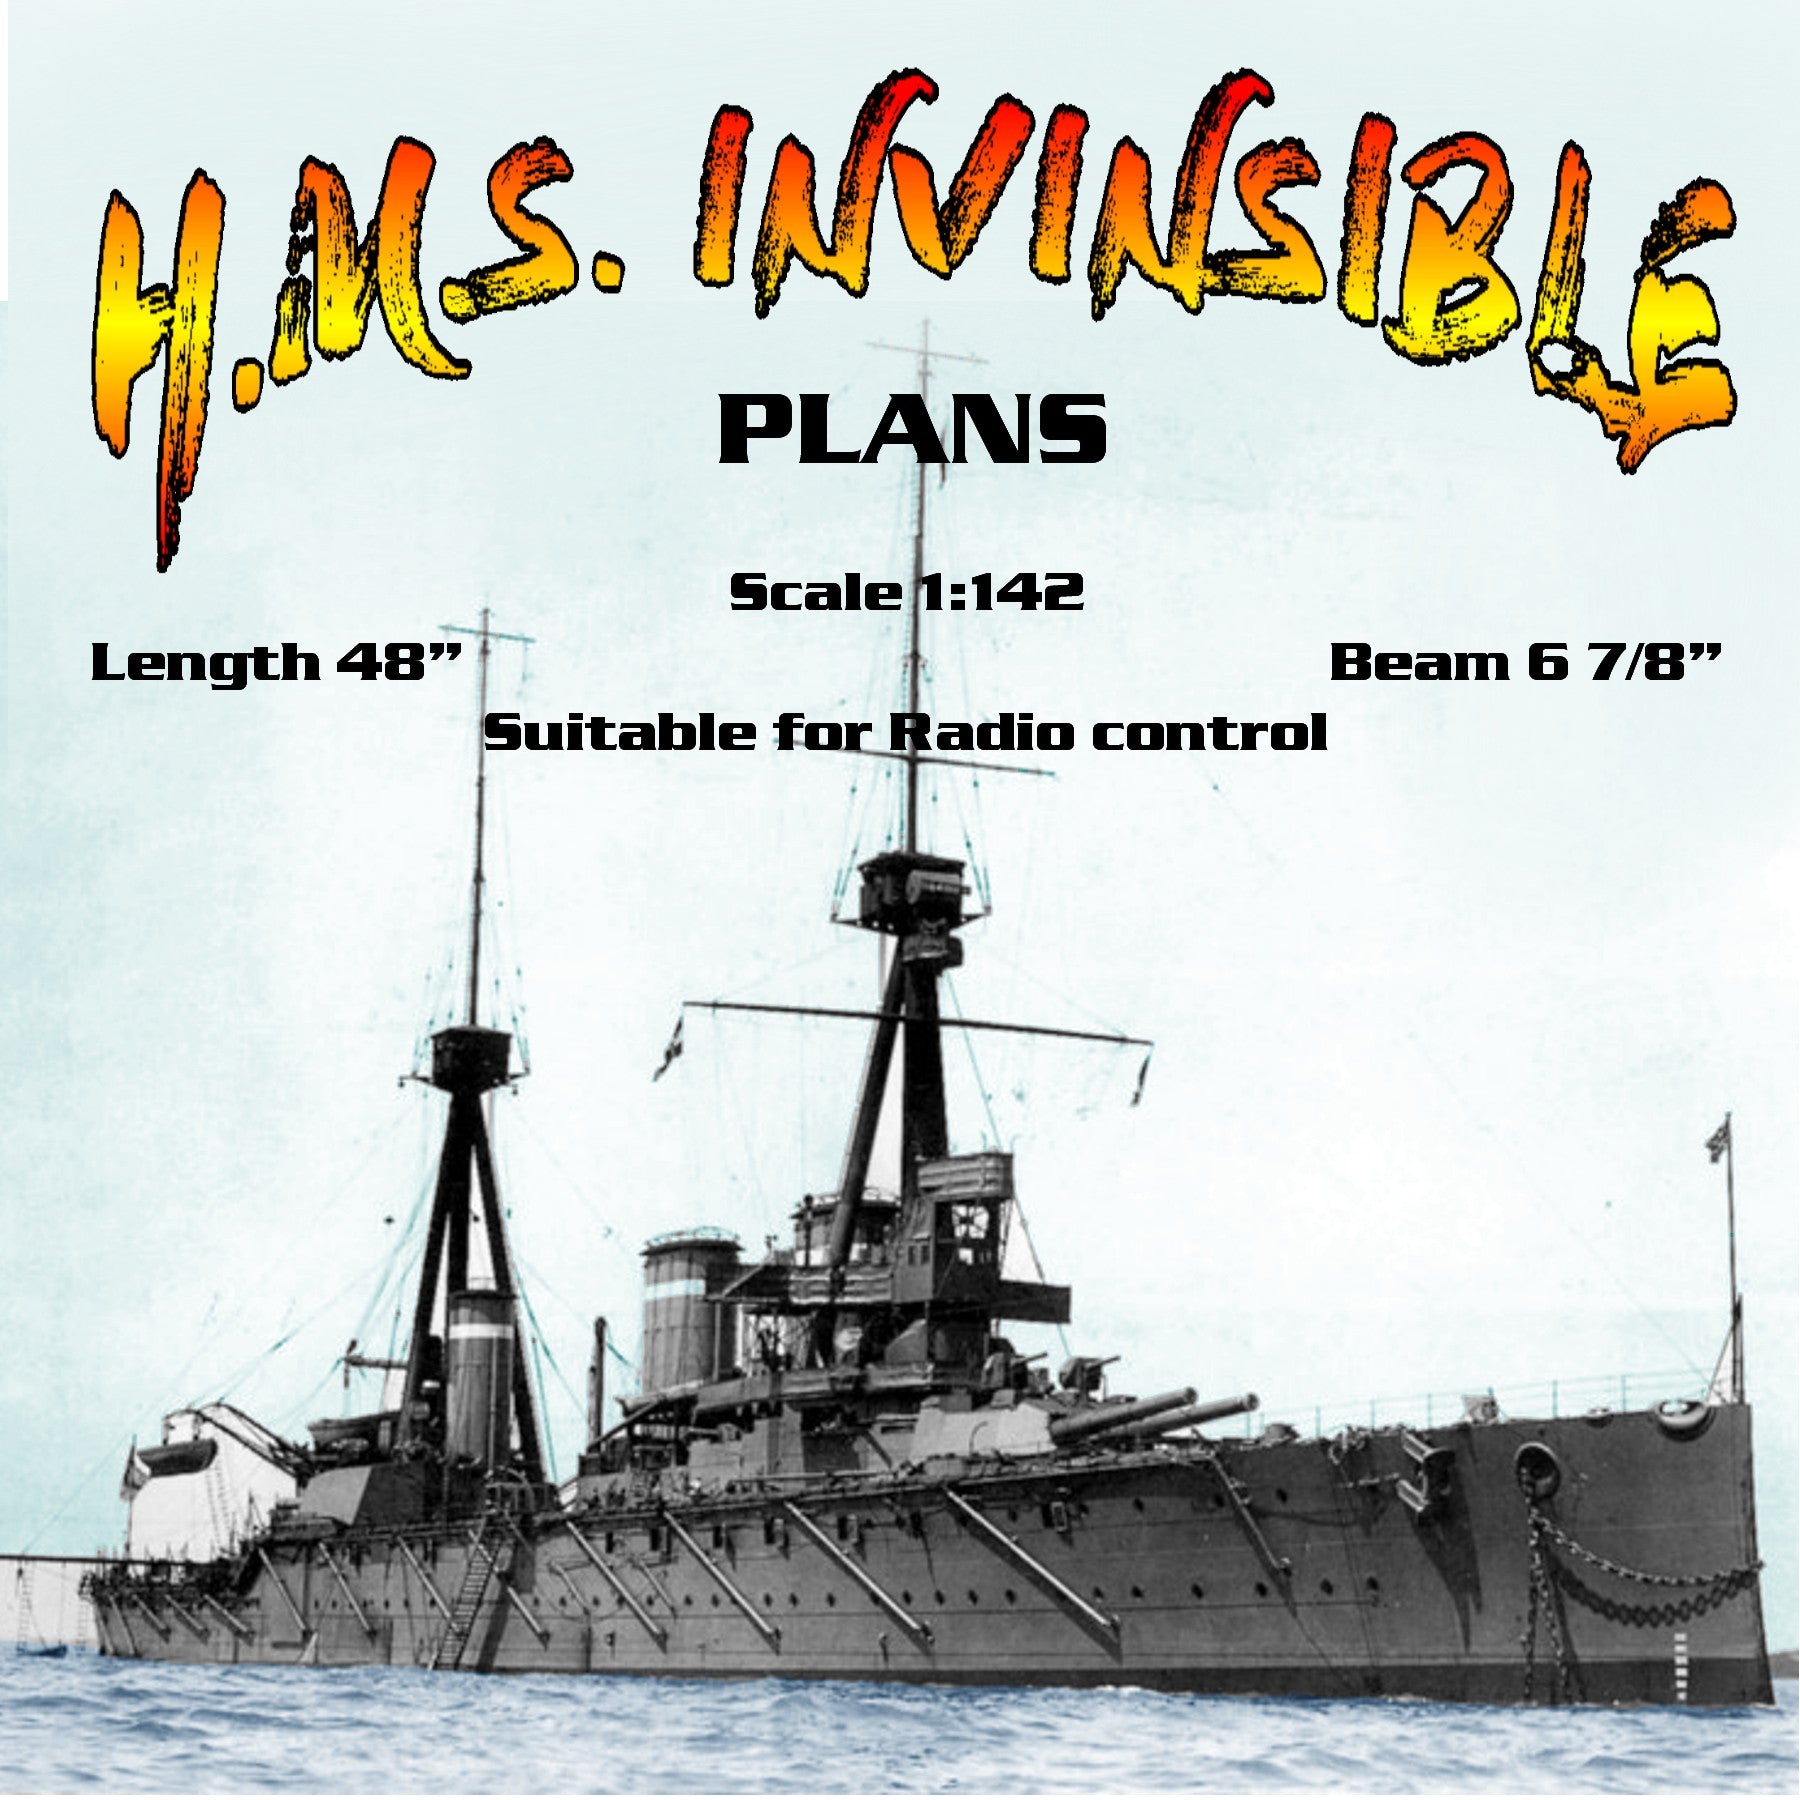 full size printed plans scale 1:142 battlecruiser l 49" suitable for radio control